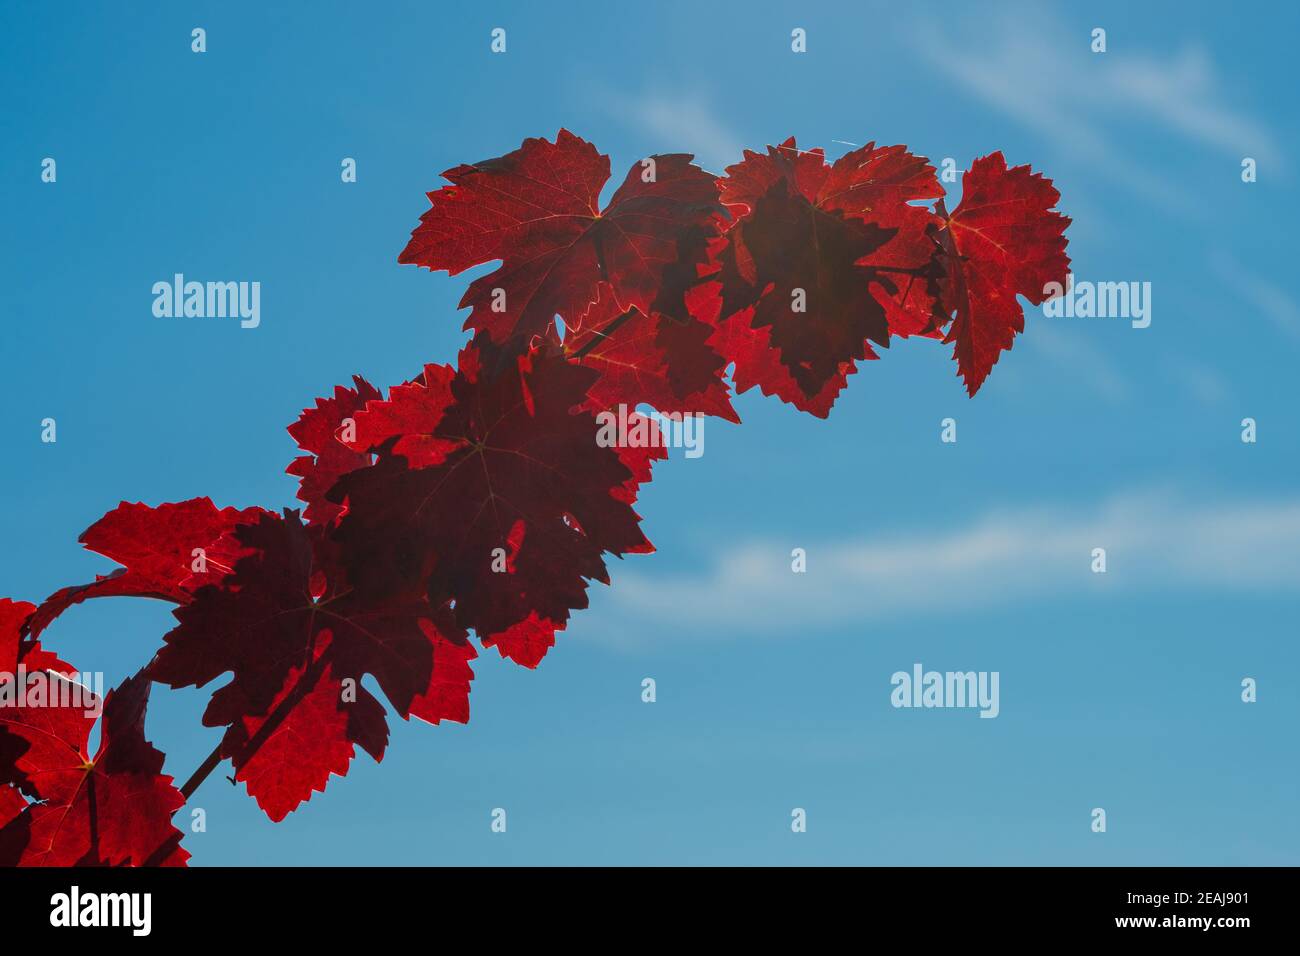 Branch with red coloured grape leaves with blue sky Stock Photo